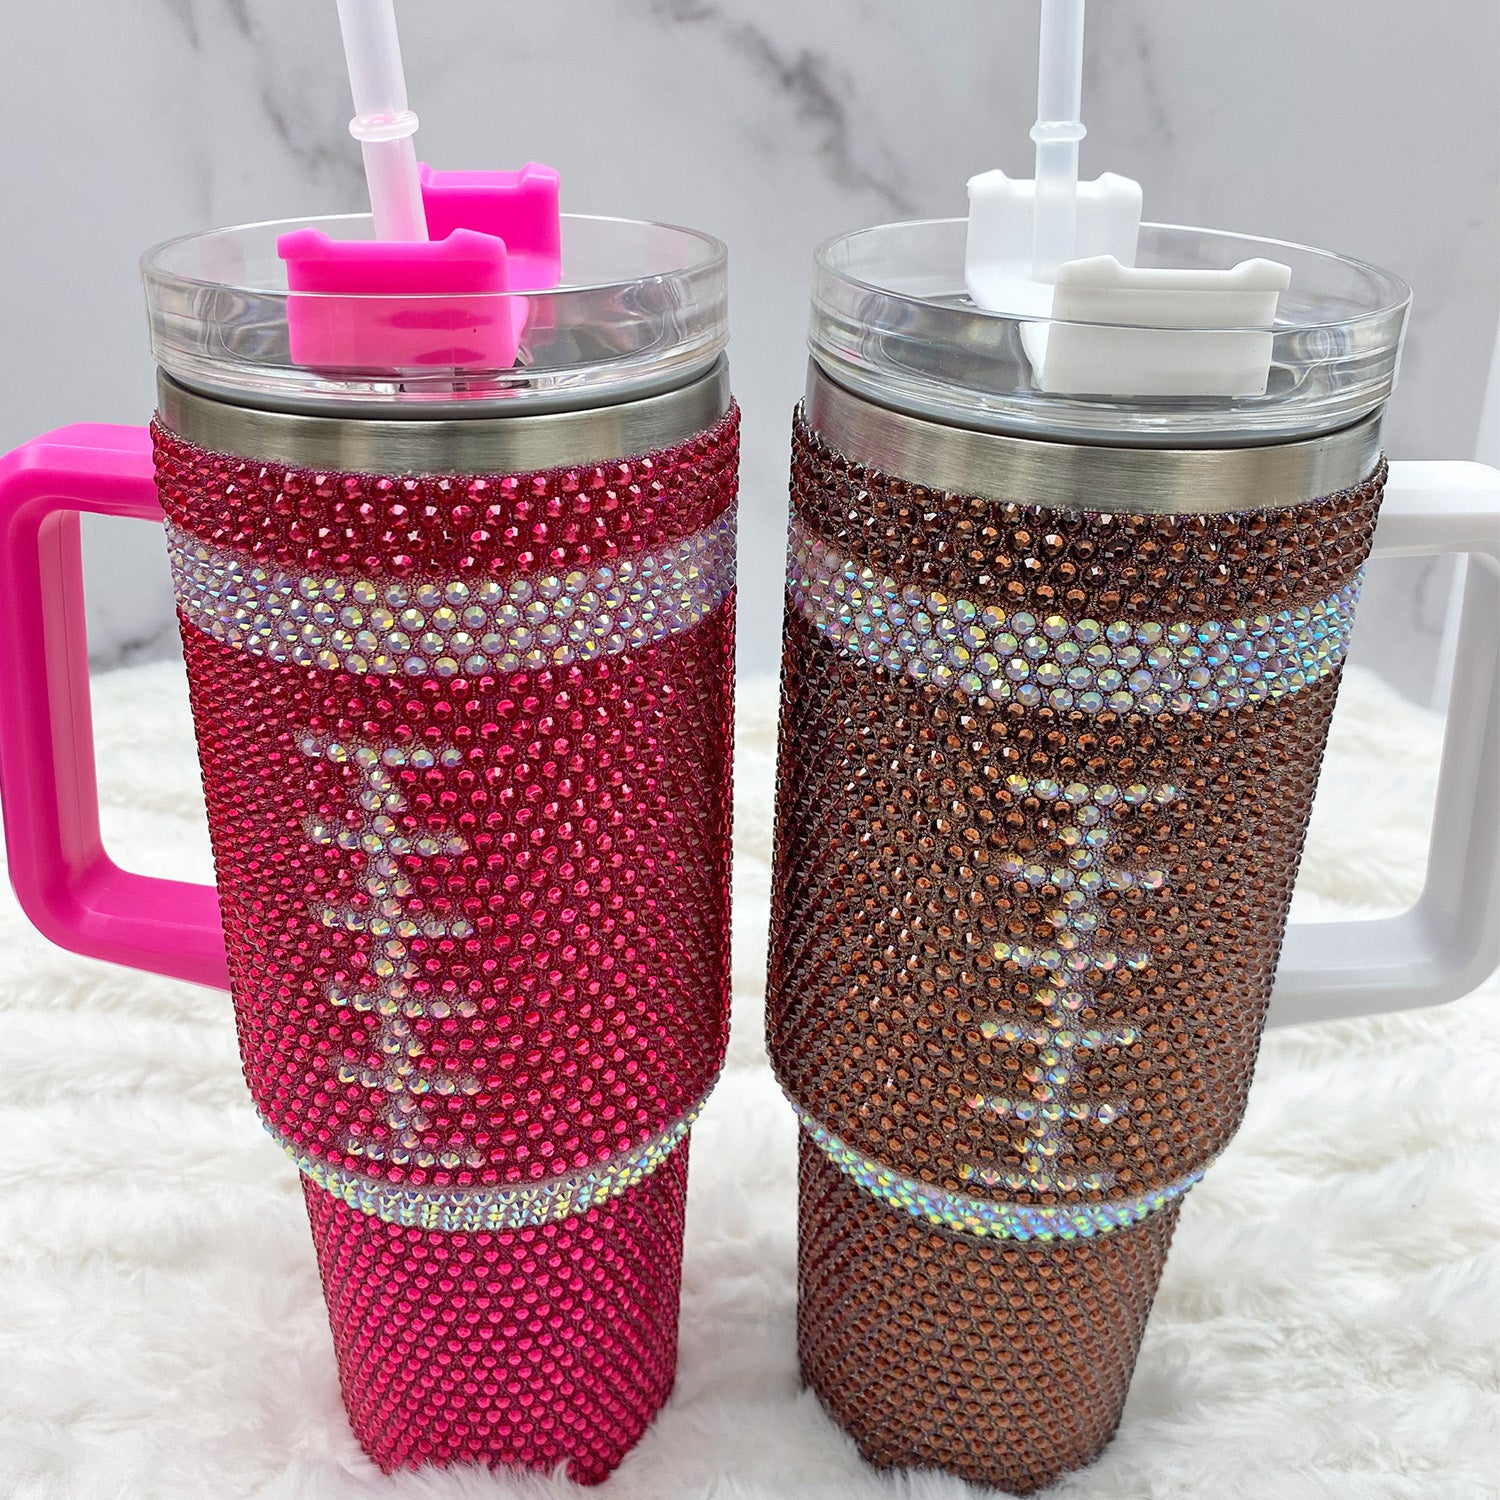 Pink and Brown Rhinestone Tumblers with Football design.  all SKUs